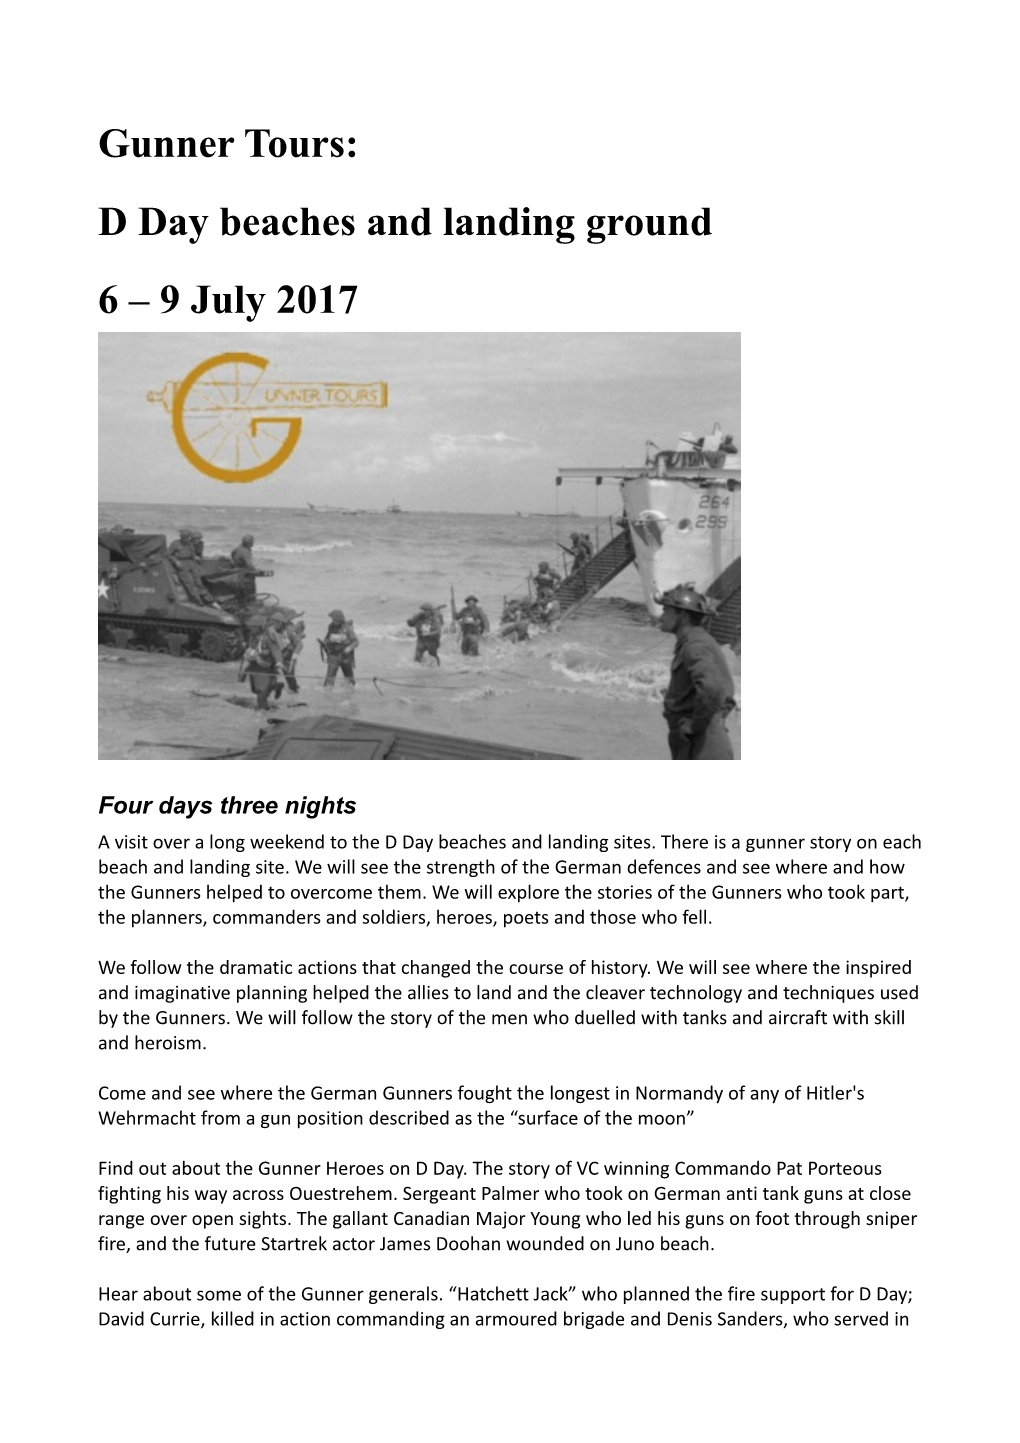 D Day Beaches and Landing Ground